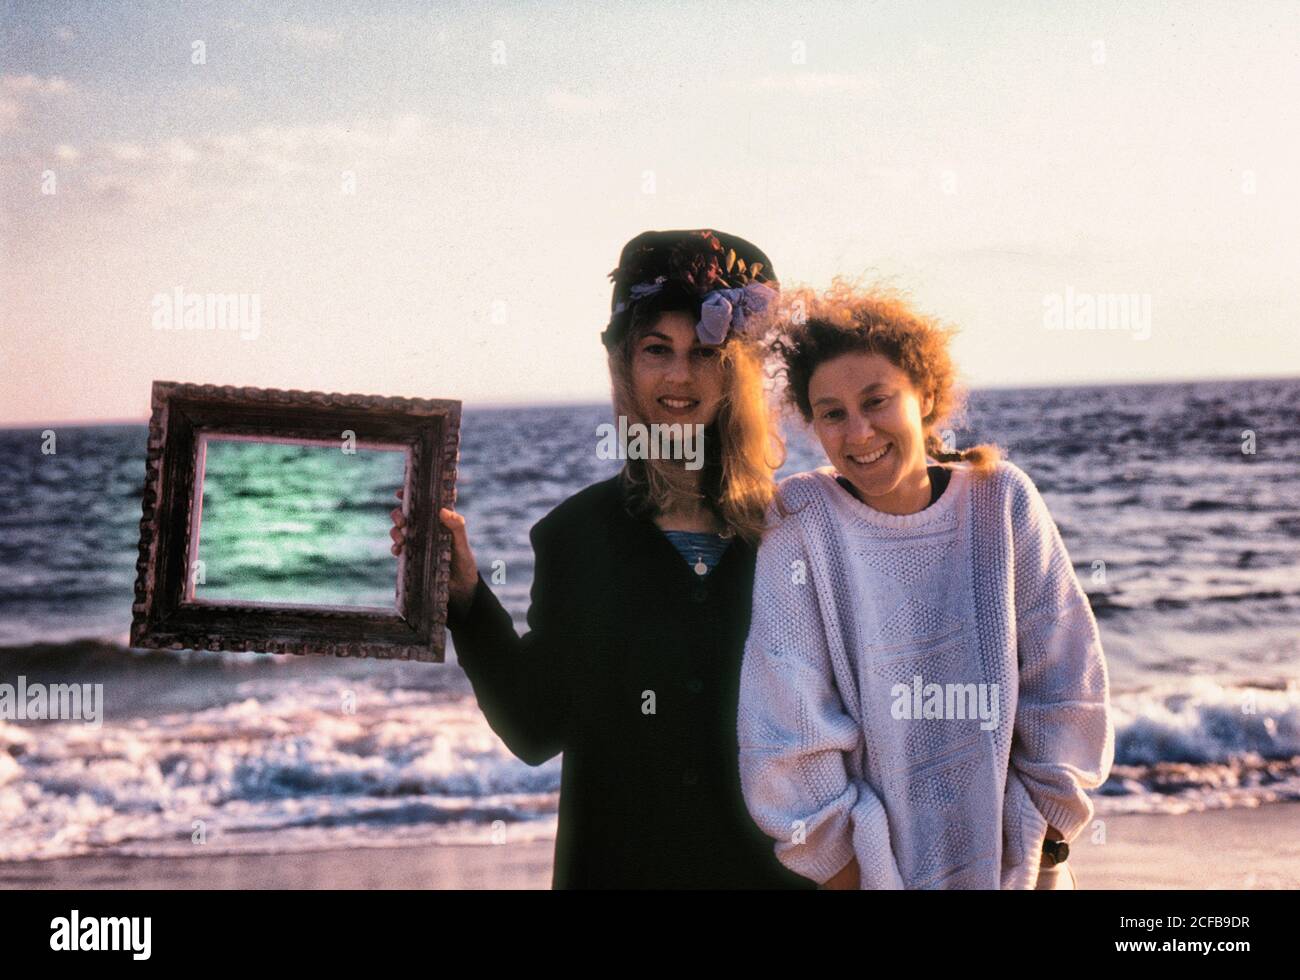 Two Young women stand near ocean with picture frame Stock Photo